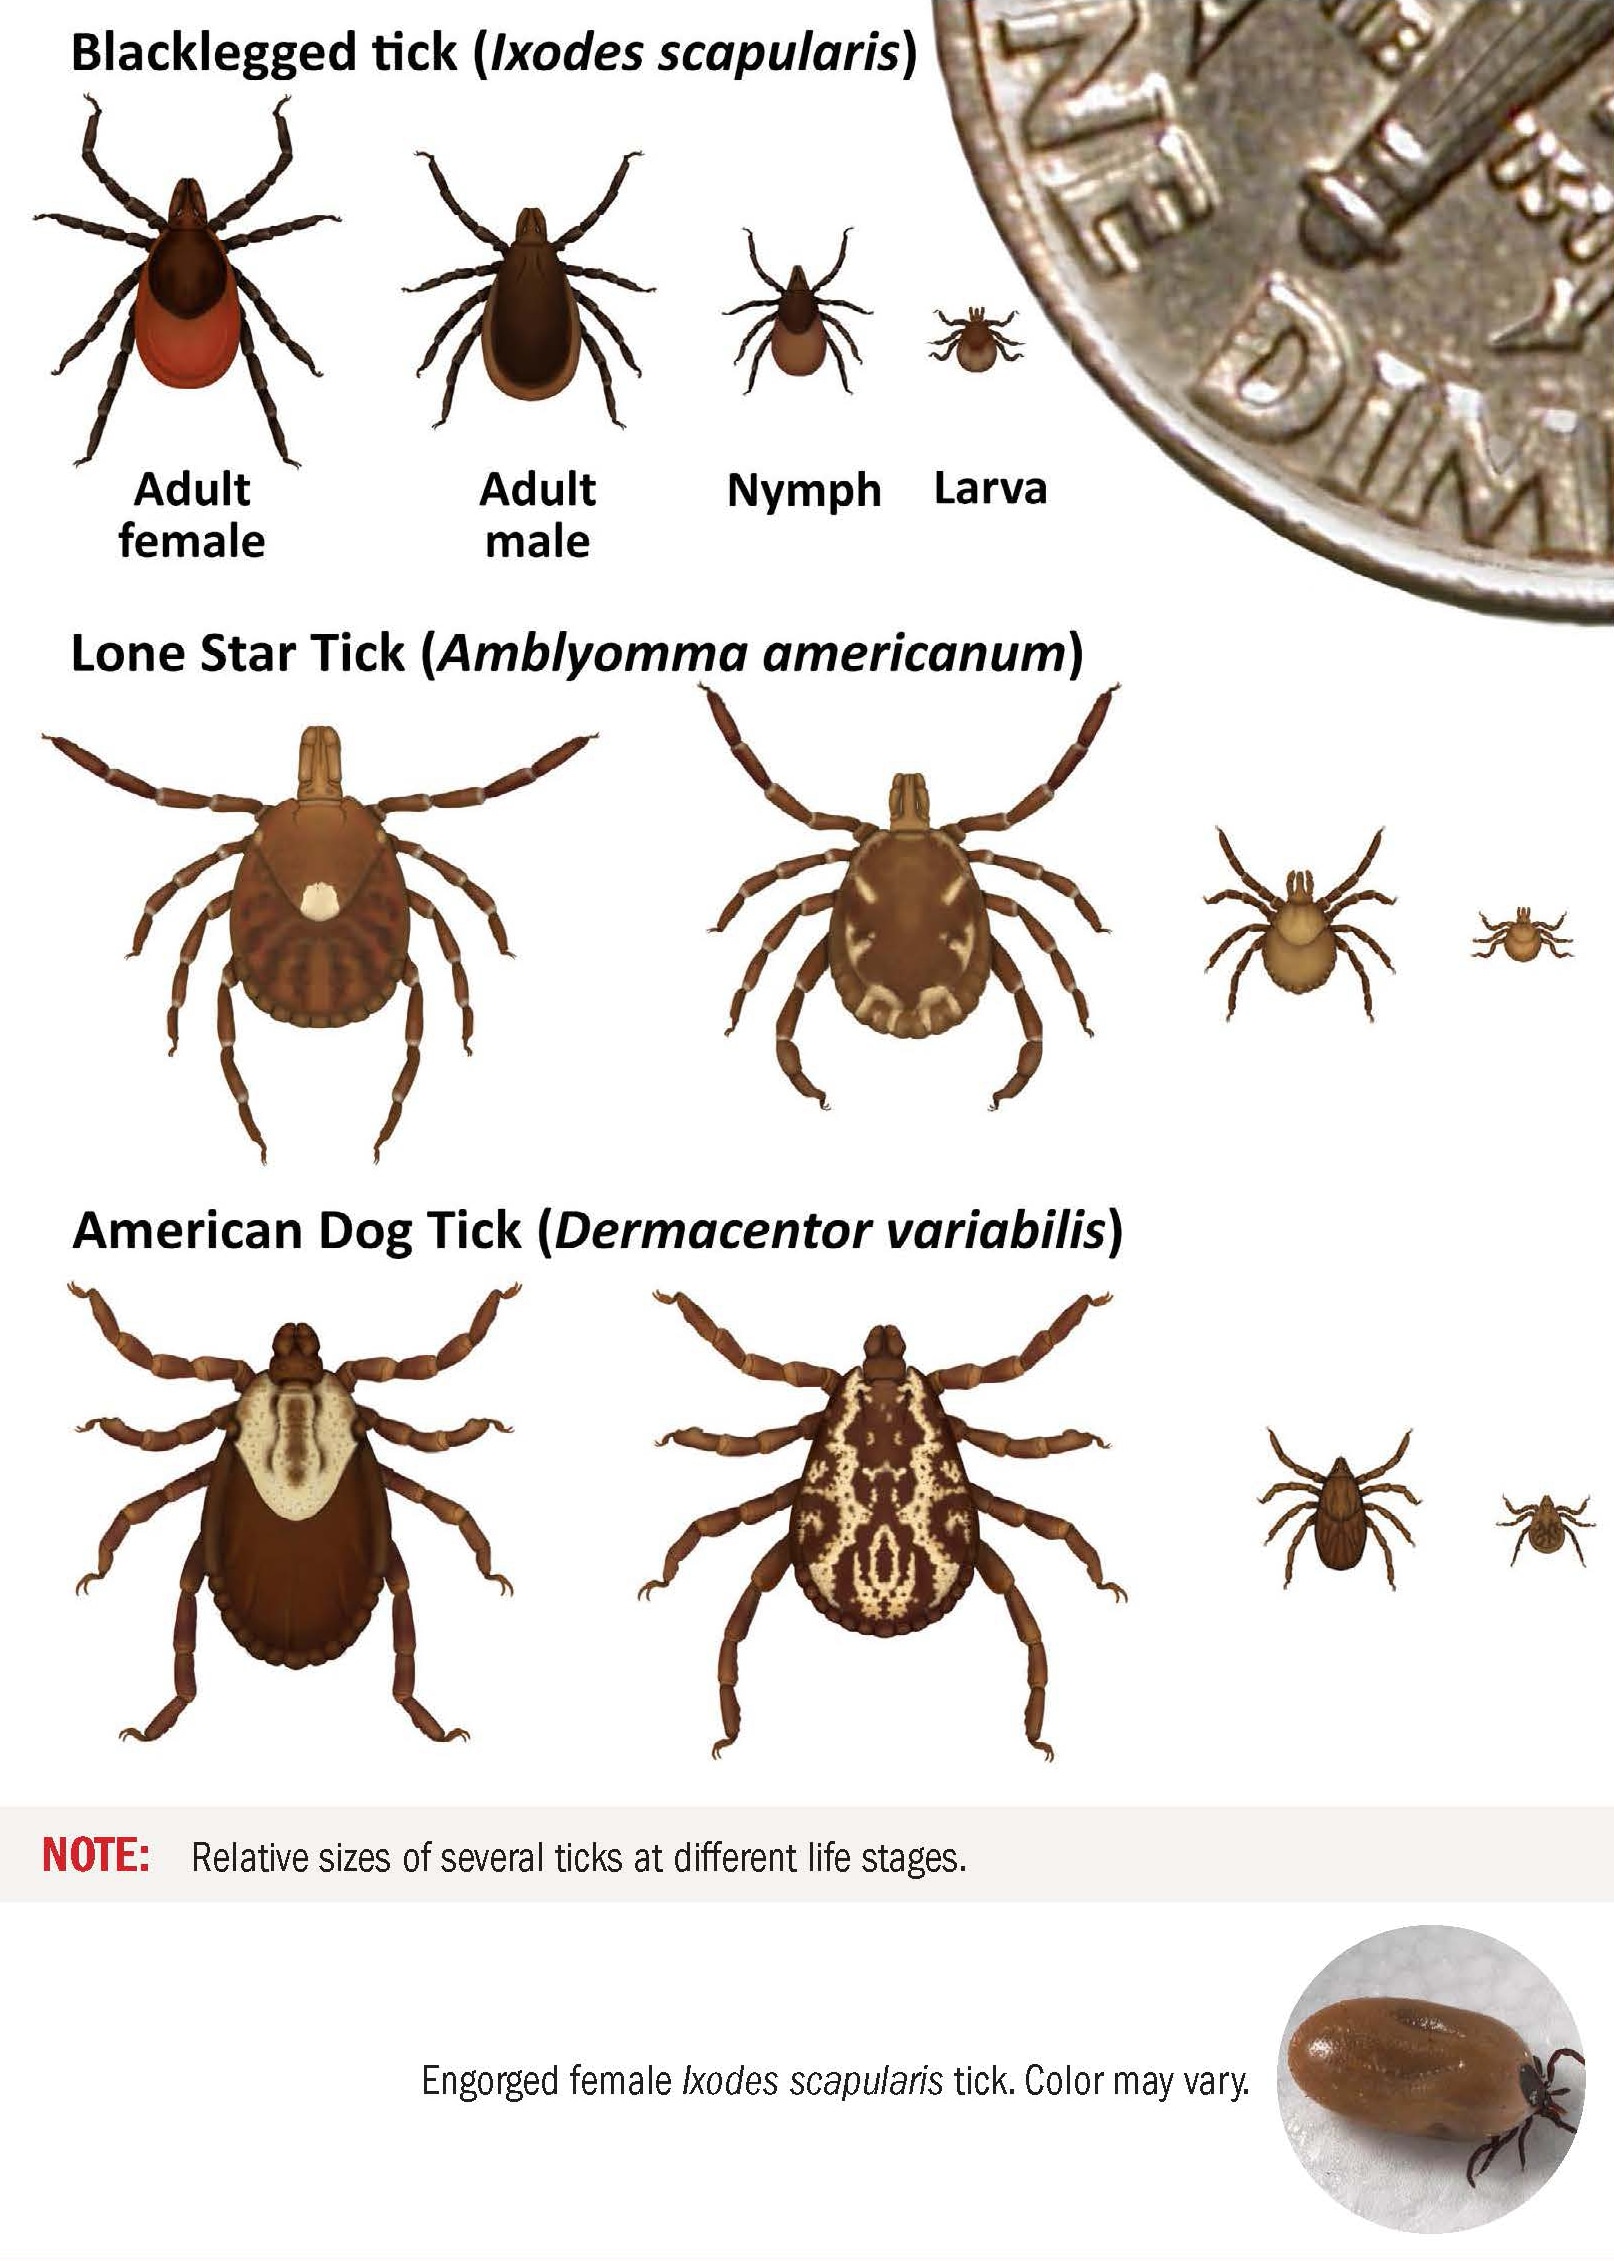 Ticks that commonly bite humans showing relative sizes compared to a dime coin of several ticks at different life stages